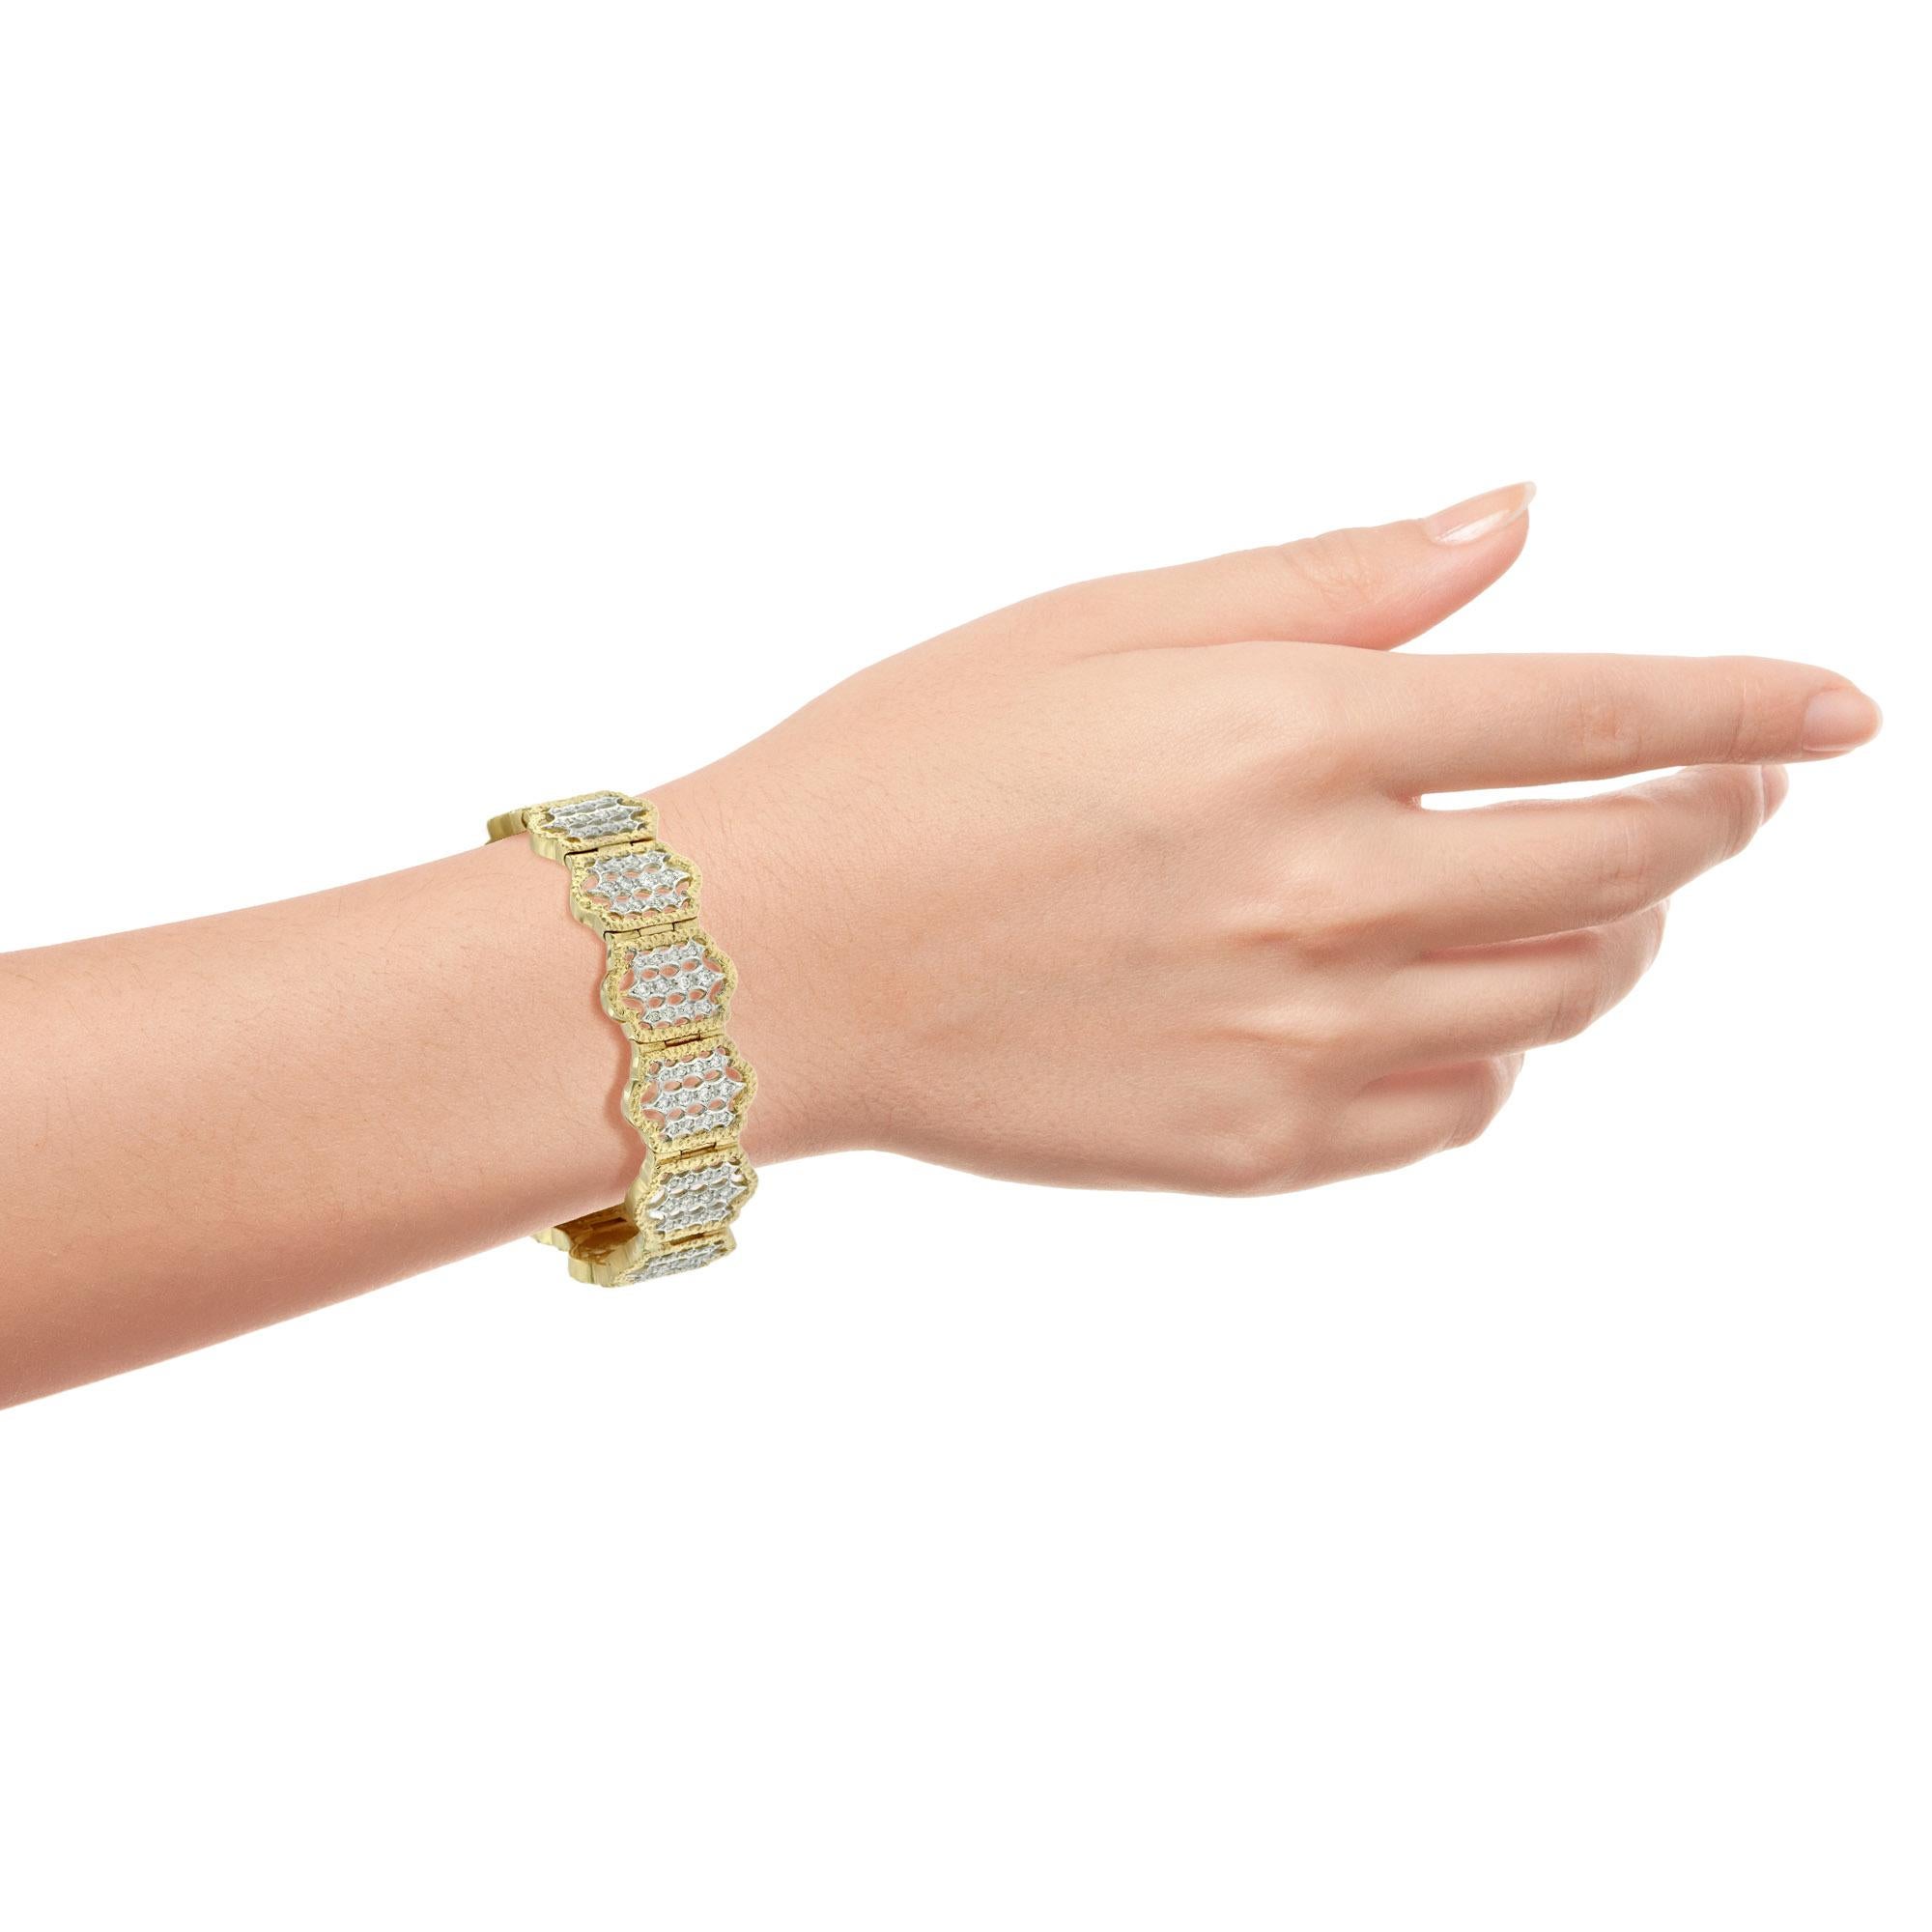 This wonderful geometric motif bracelet is beautifully finished in both 18k white and yellow gold. The entire frame of the bracelet is finished in rich yellow gold, which beautifully juxtaposes the bright white gold inside the frame. A remarkable